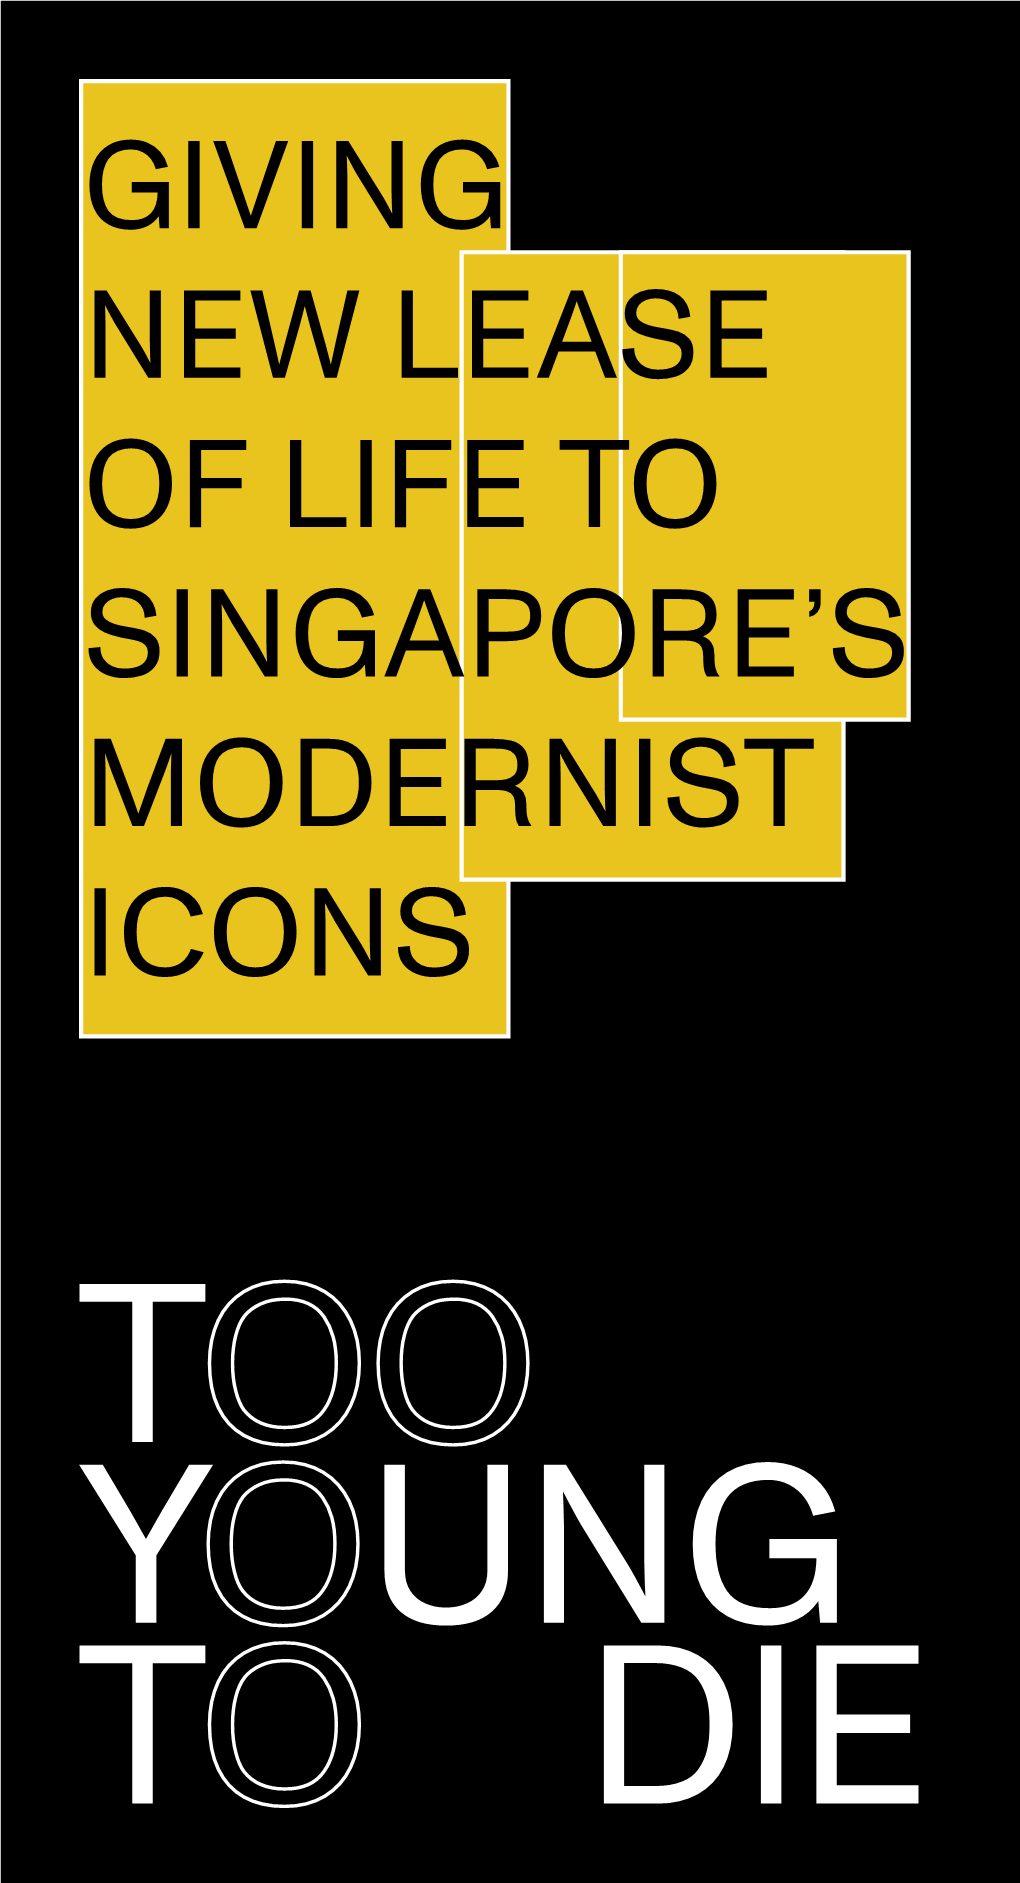 Giving New Lease of Life to Singapore's Modernist Icons